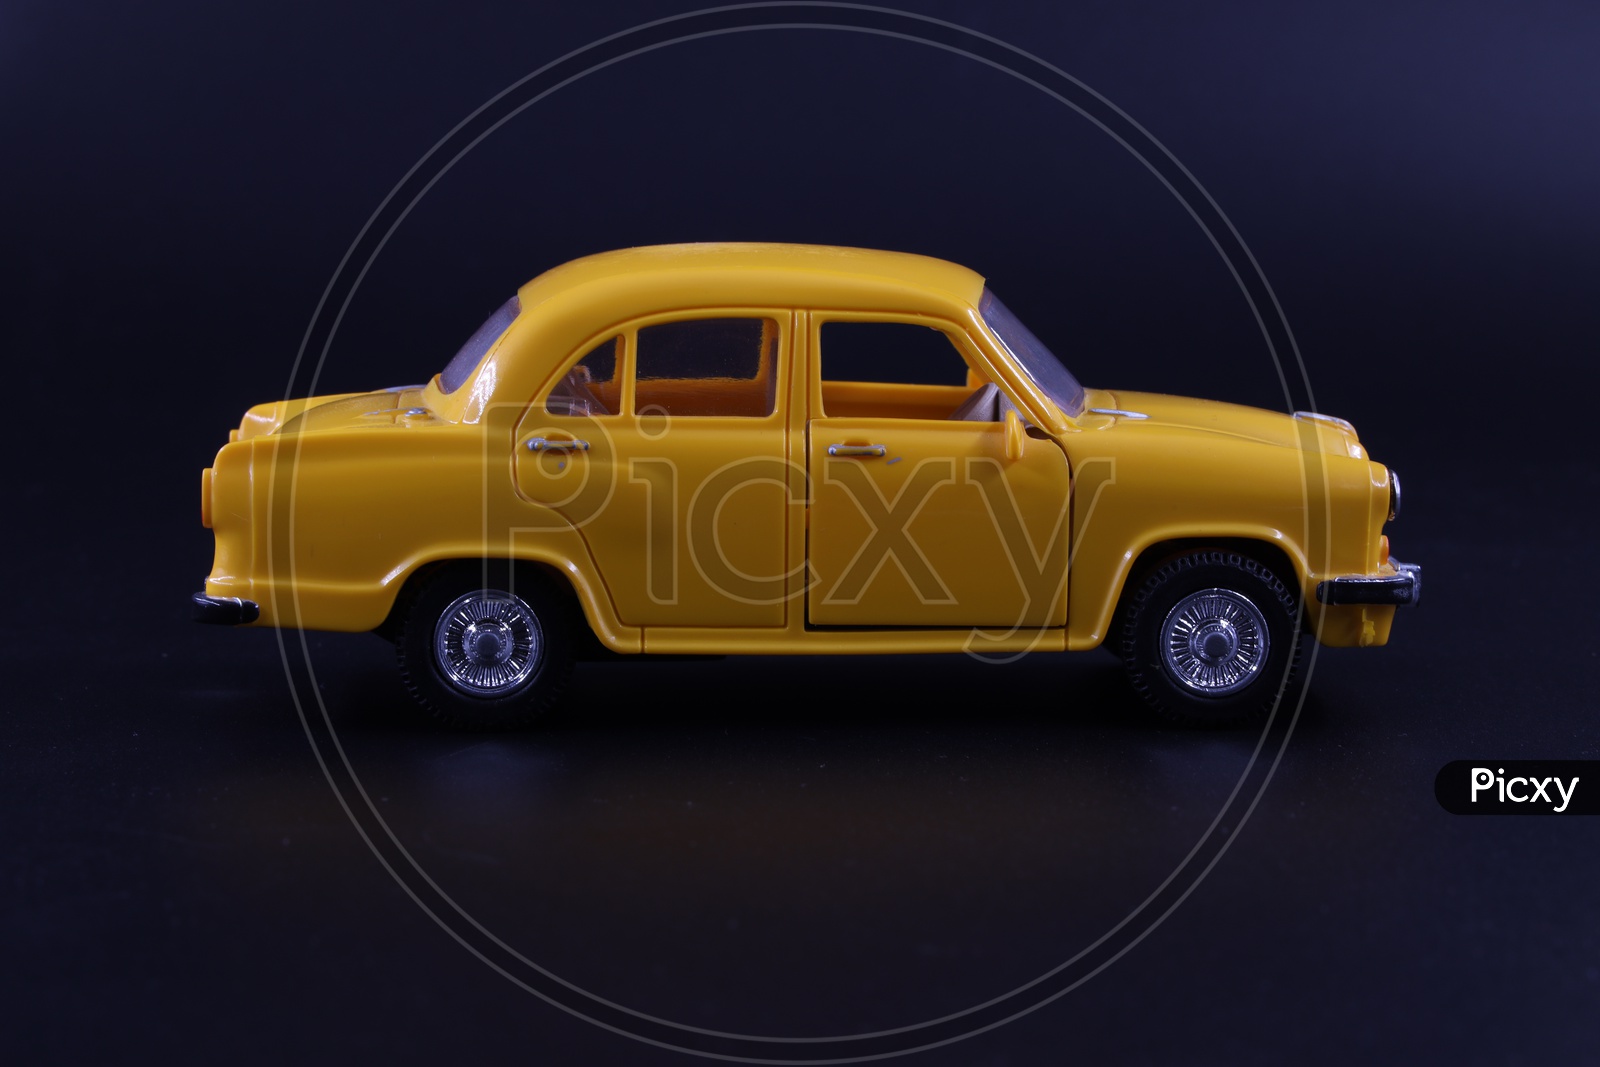 A Yellow Taxi  Or Cab or Car  Toy  Composition Shot On an Isolated Black Background